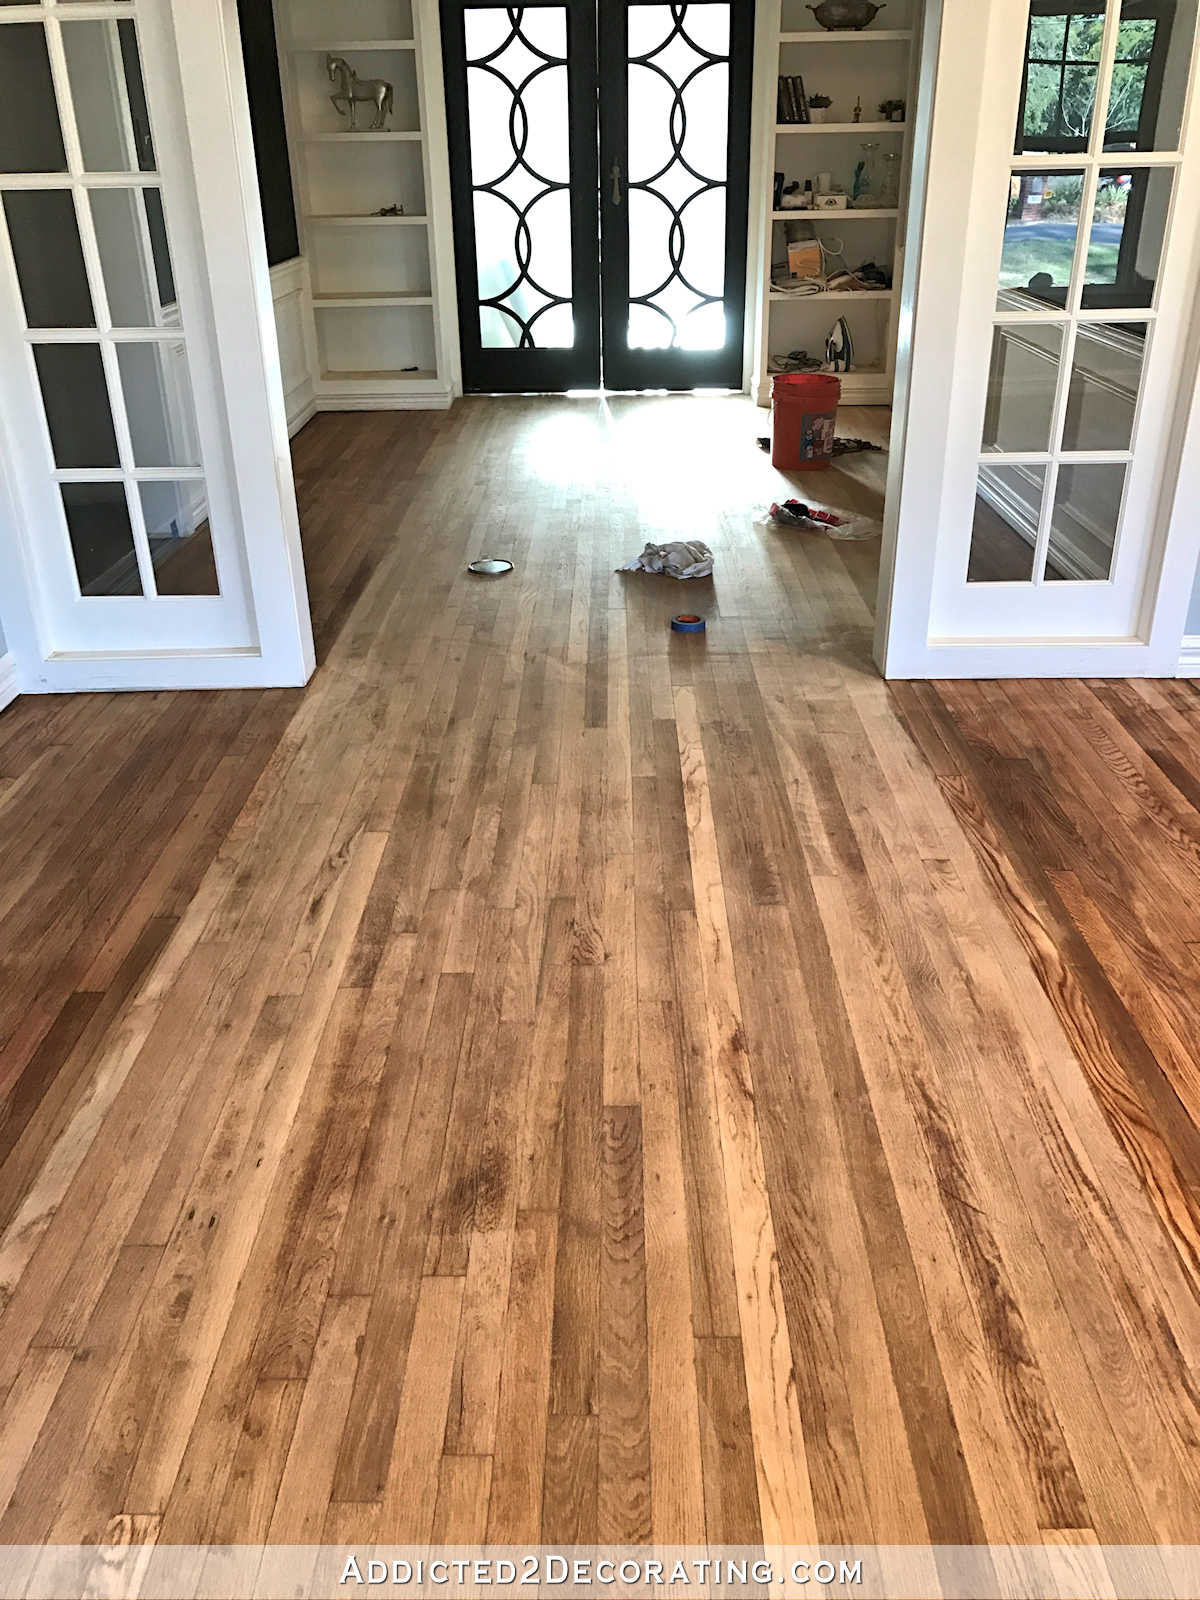 pictures of light colored hardwood floors of adventures in staining my red oak hardwood floors products process regarding staining red oak hardwood floors 5 music room wood conditioner